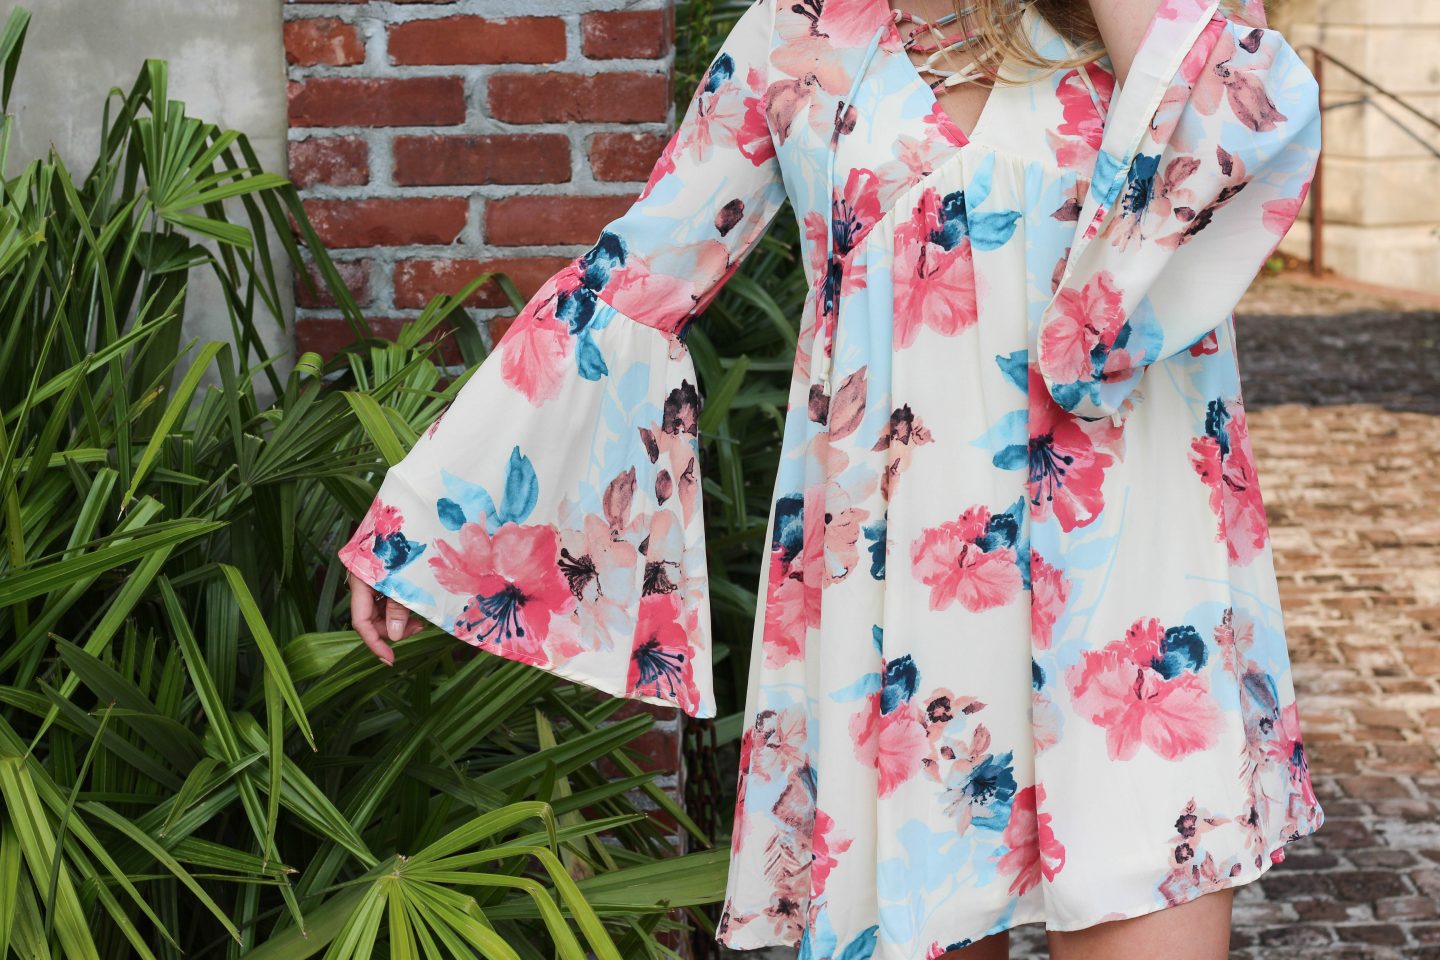 Floral Dresses to Finish the Summer